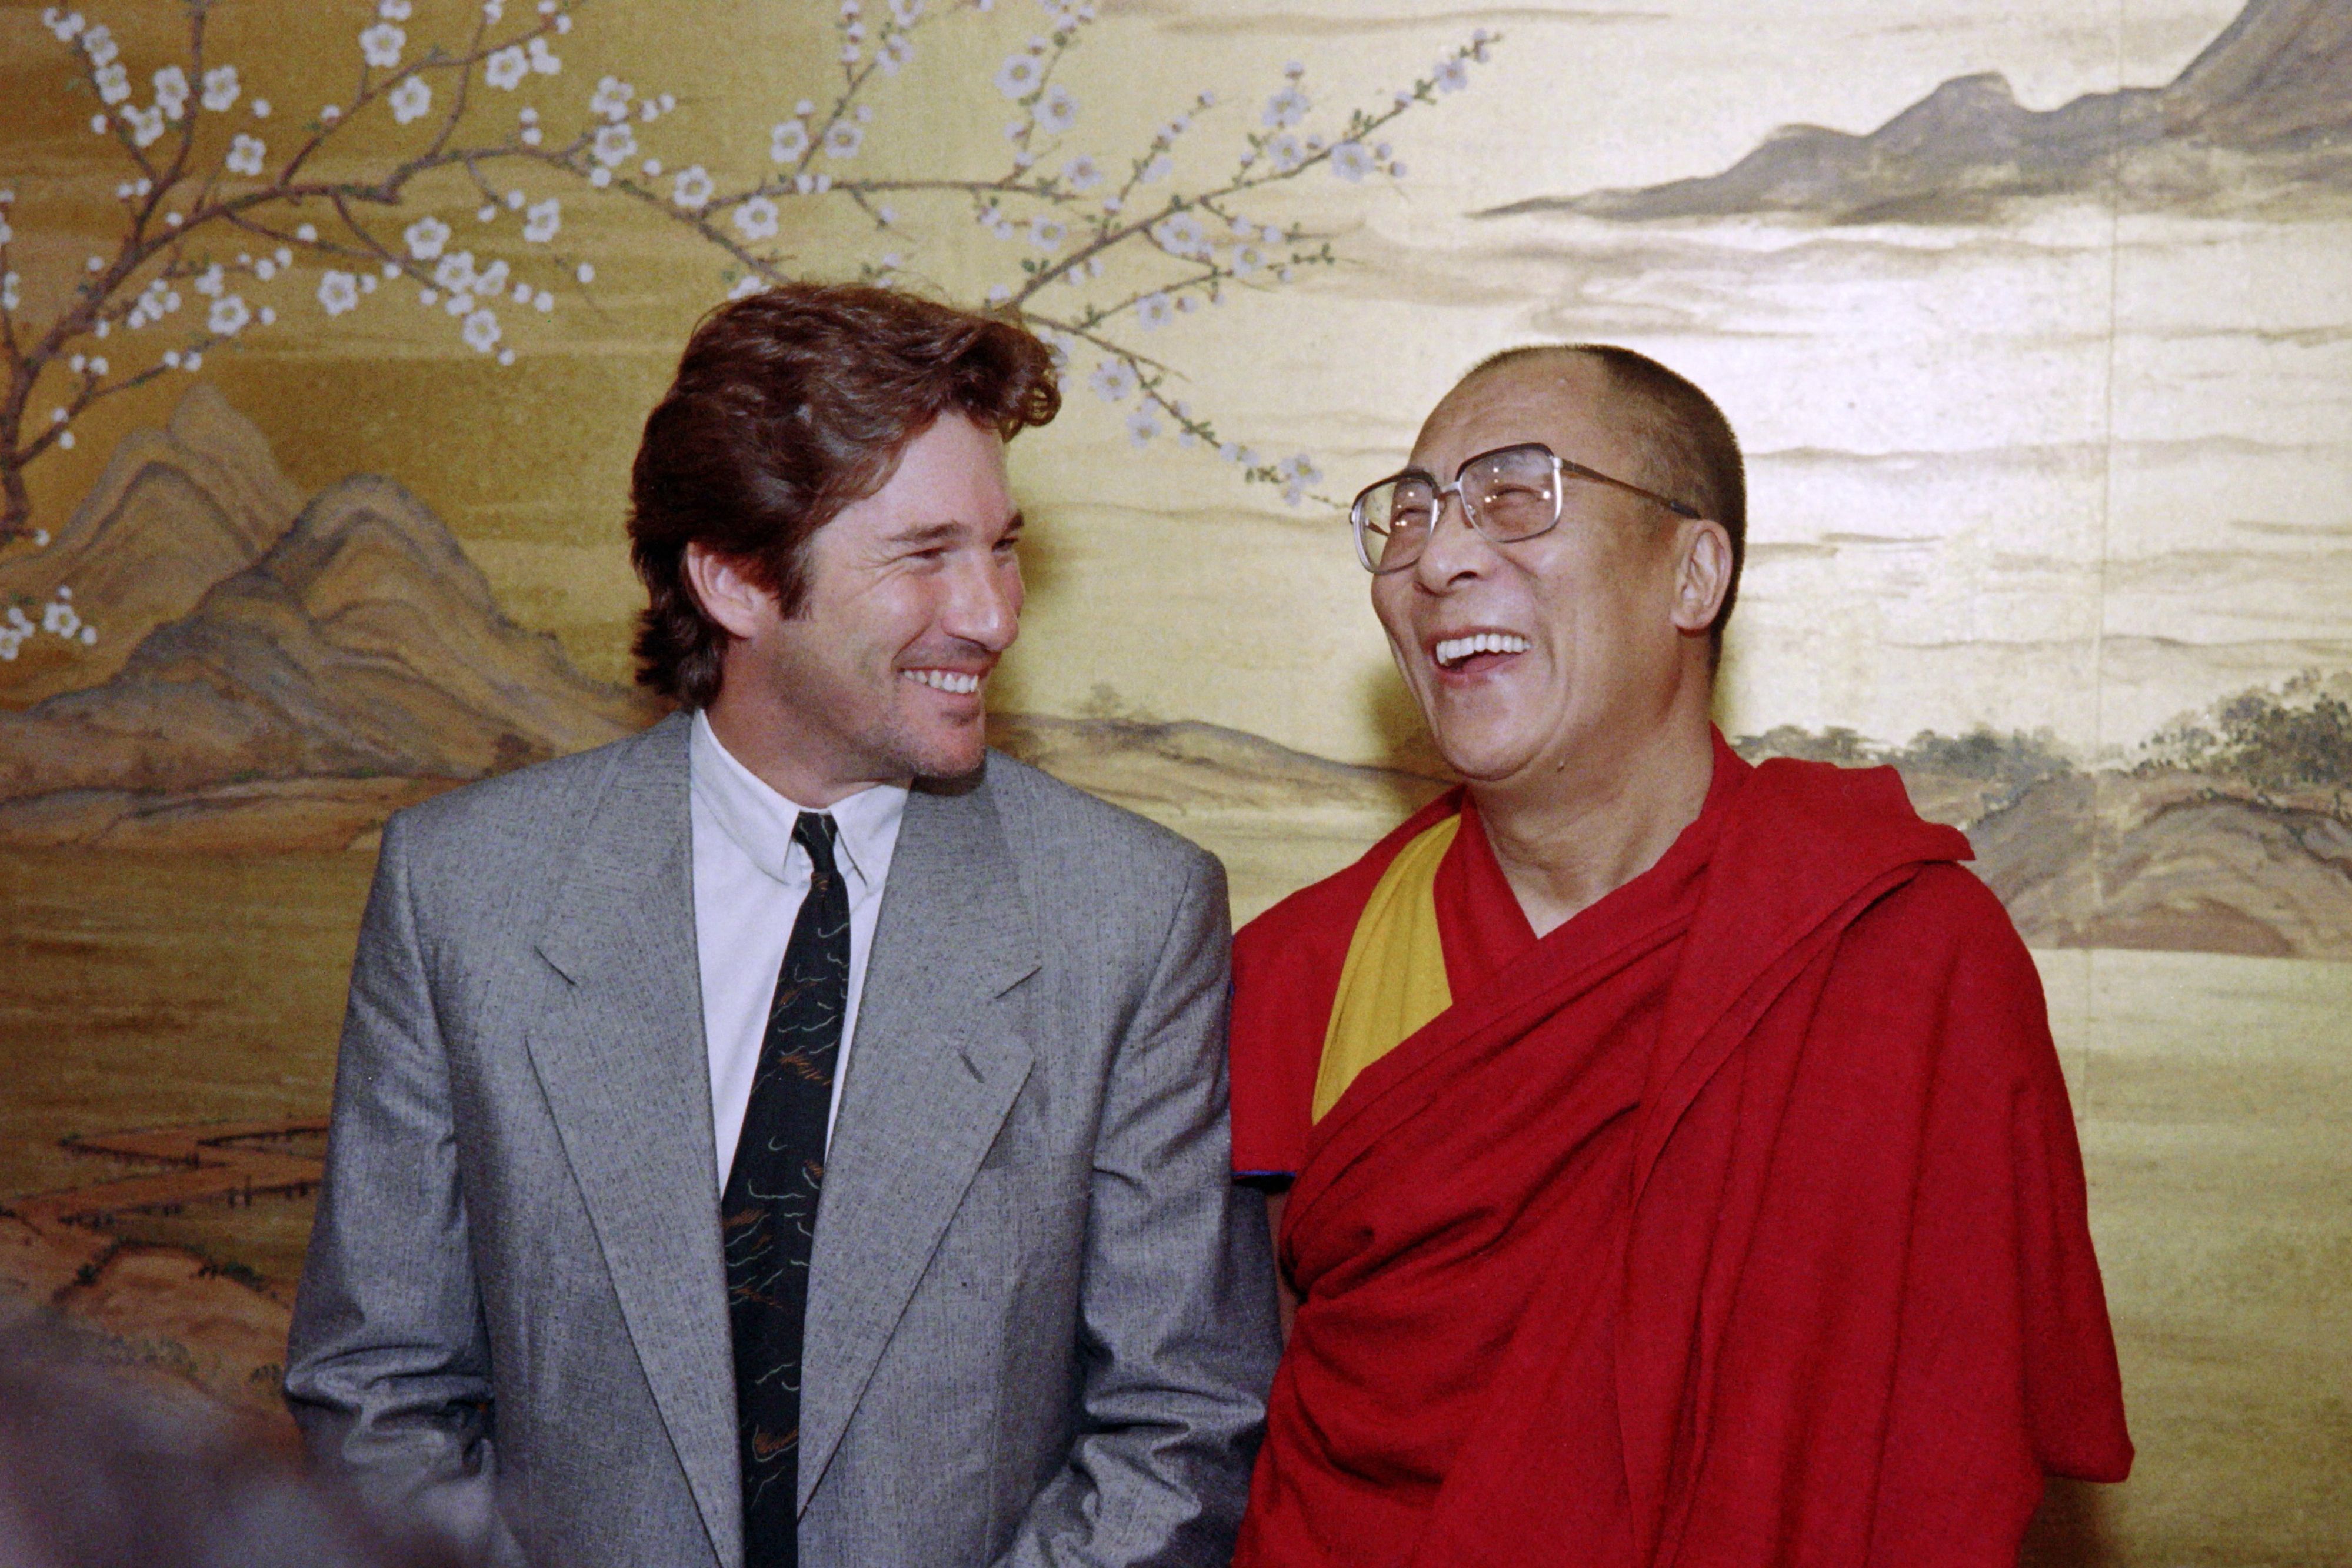 Richard Gere and the Dalai Lama photographed together in New York City on September 28, 1987 | Source: Getty Images